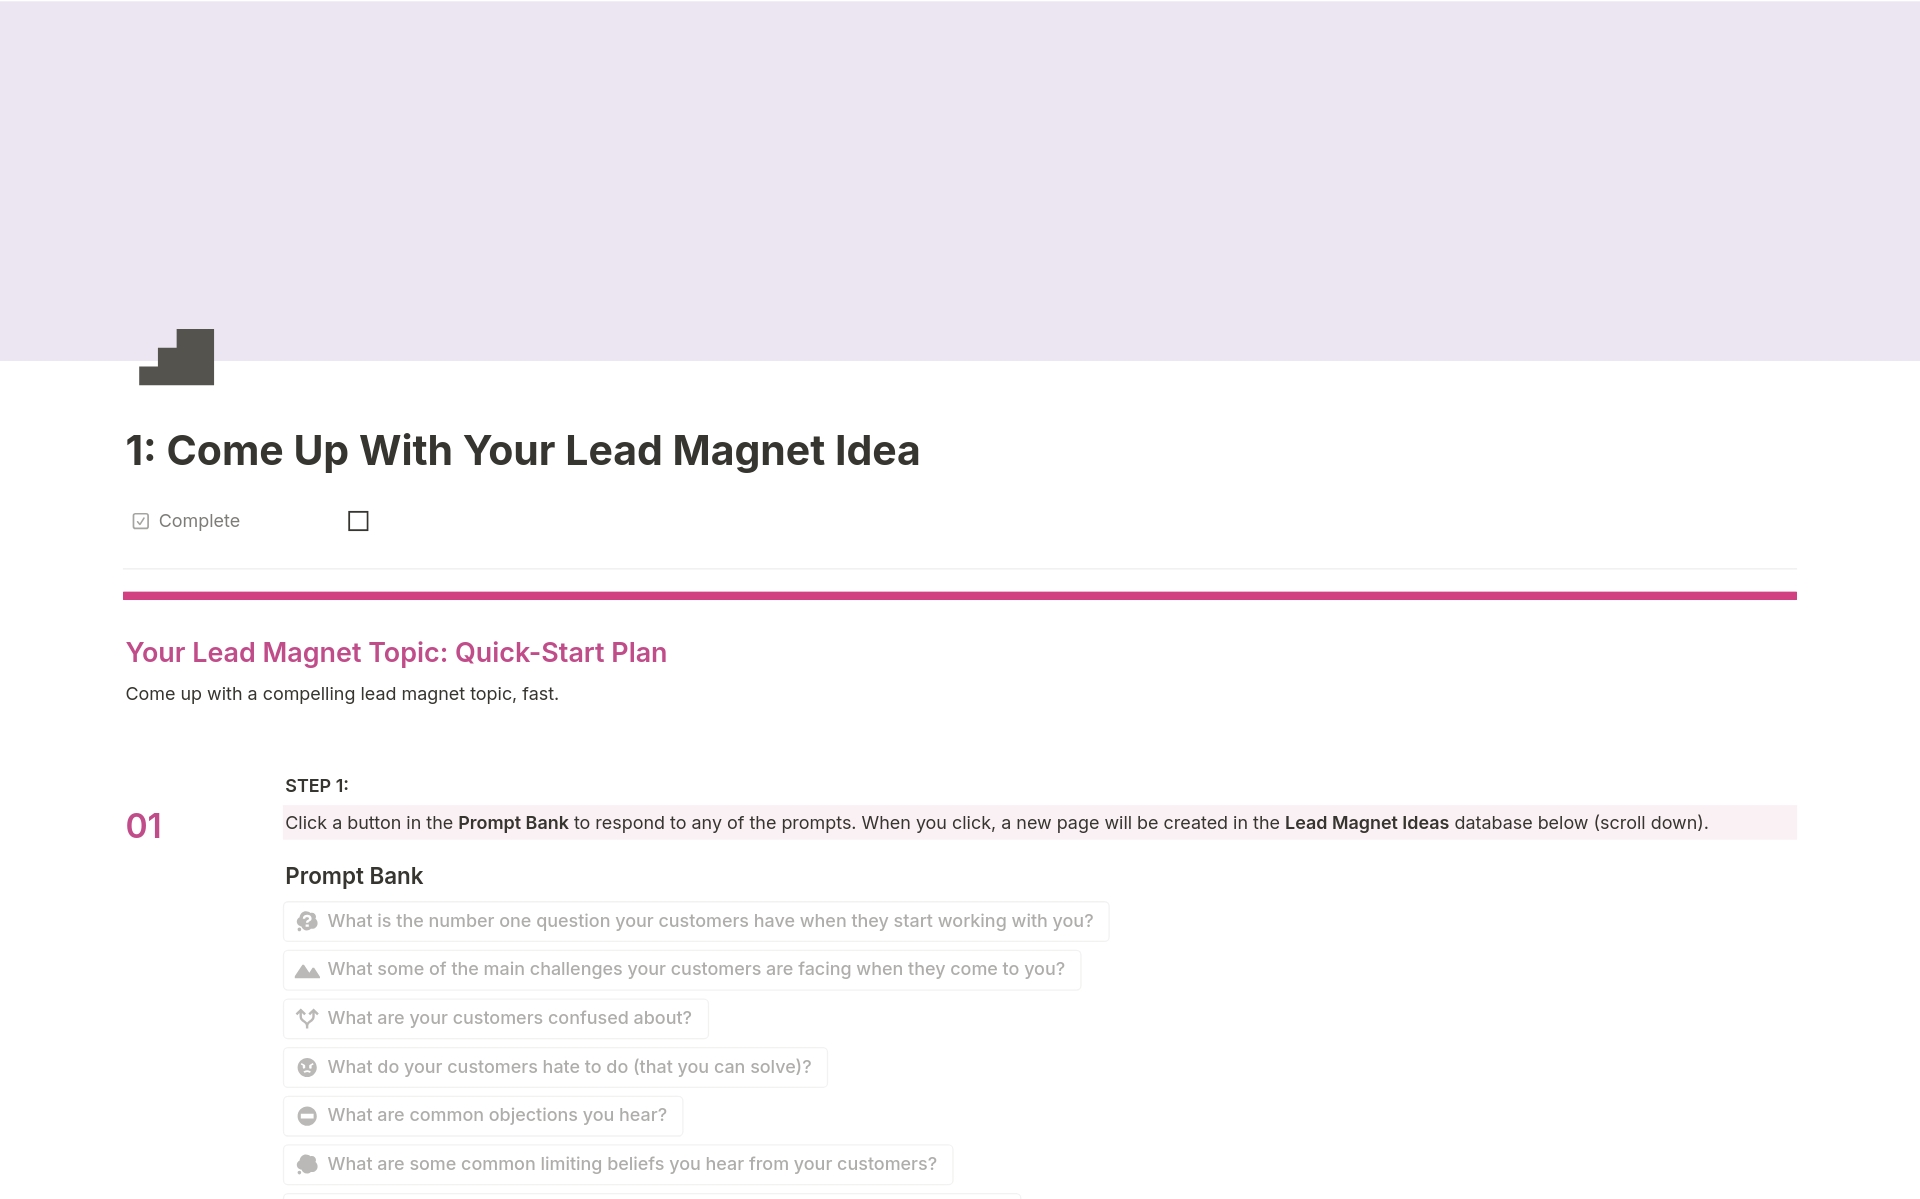 What if you could create a brand new lead magnet that grows your email list and your customer base using Notion?  The Simple Lead Magnet System takes you through a step-by-step process to create a simple lead magnet that stands out and helps to grow your list and customer base.